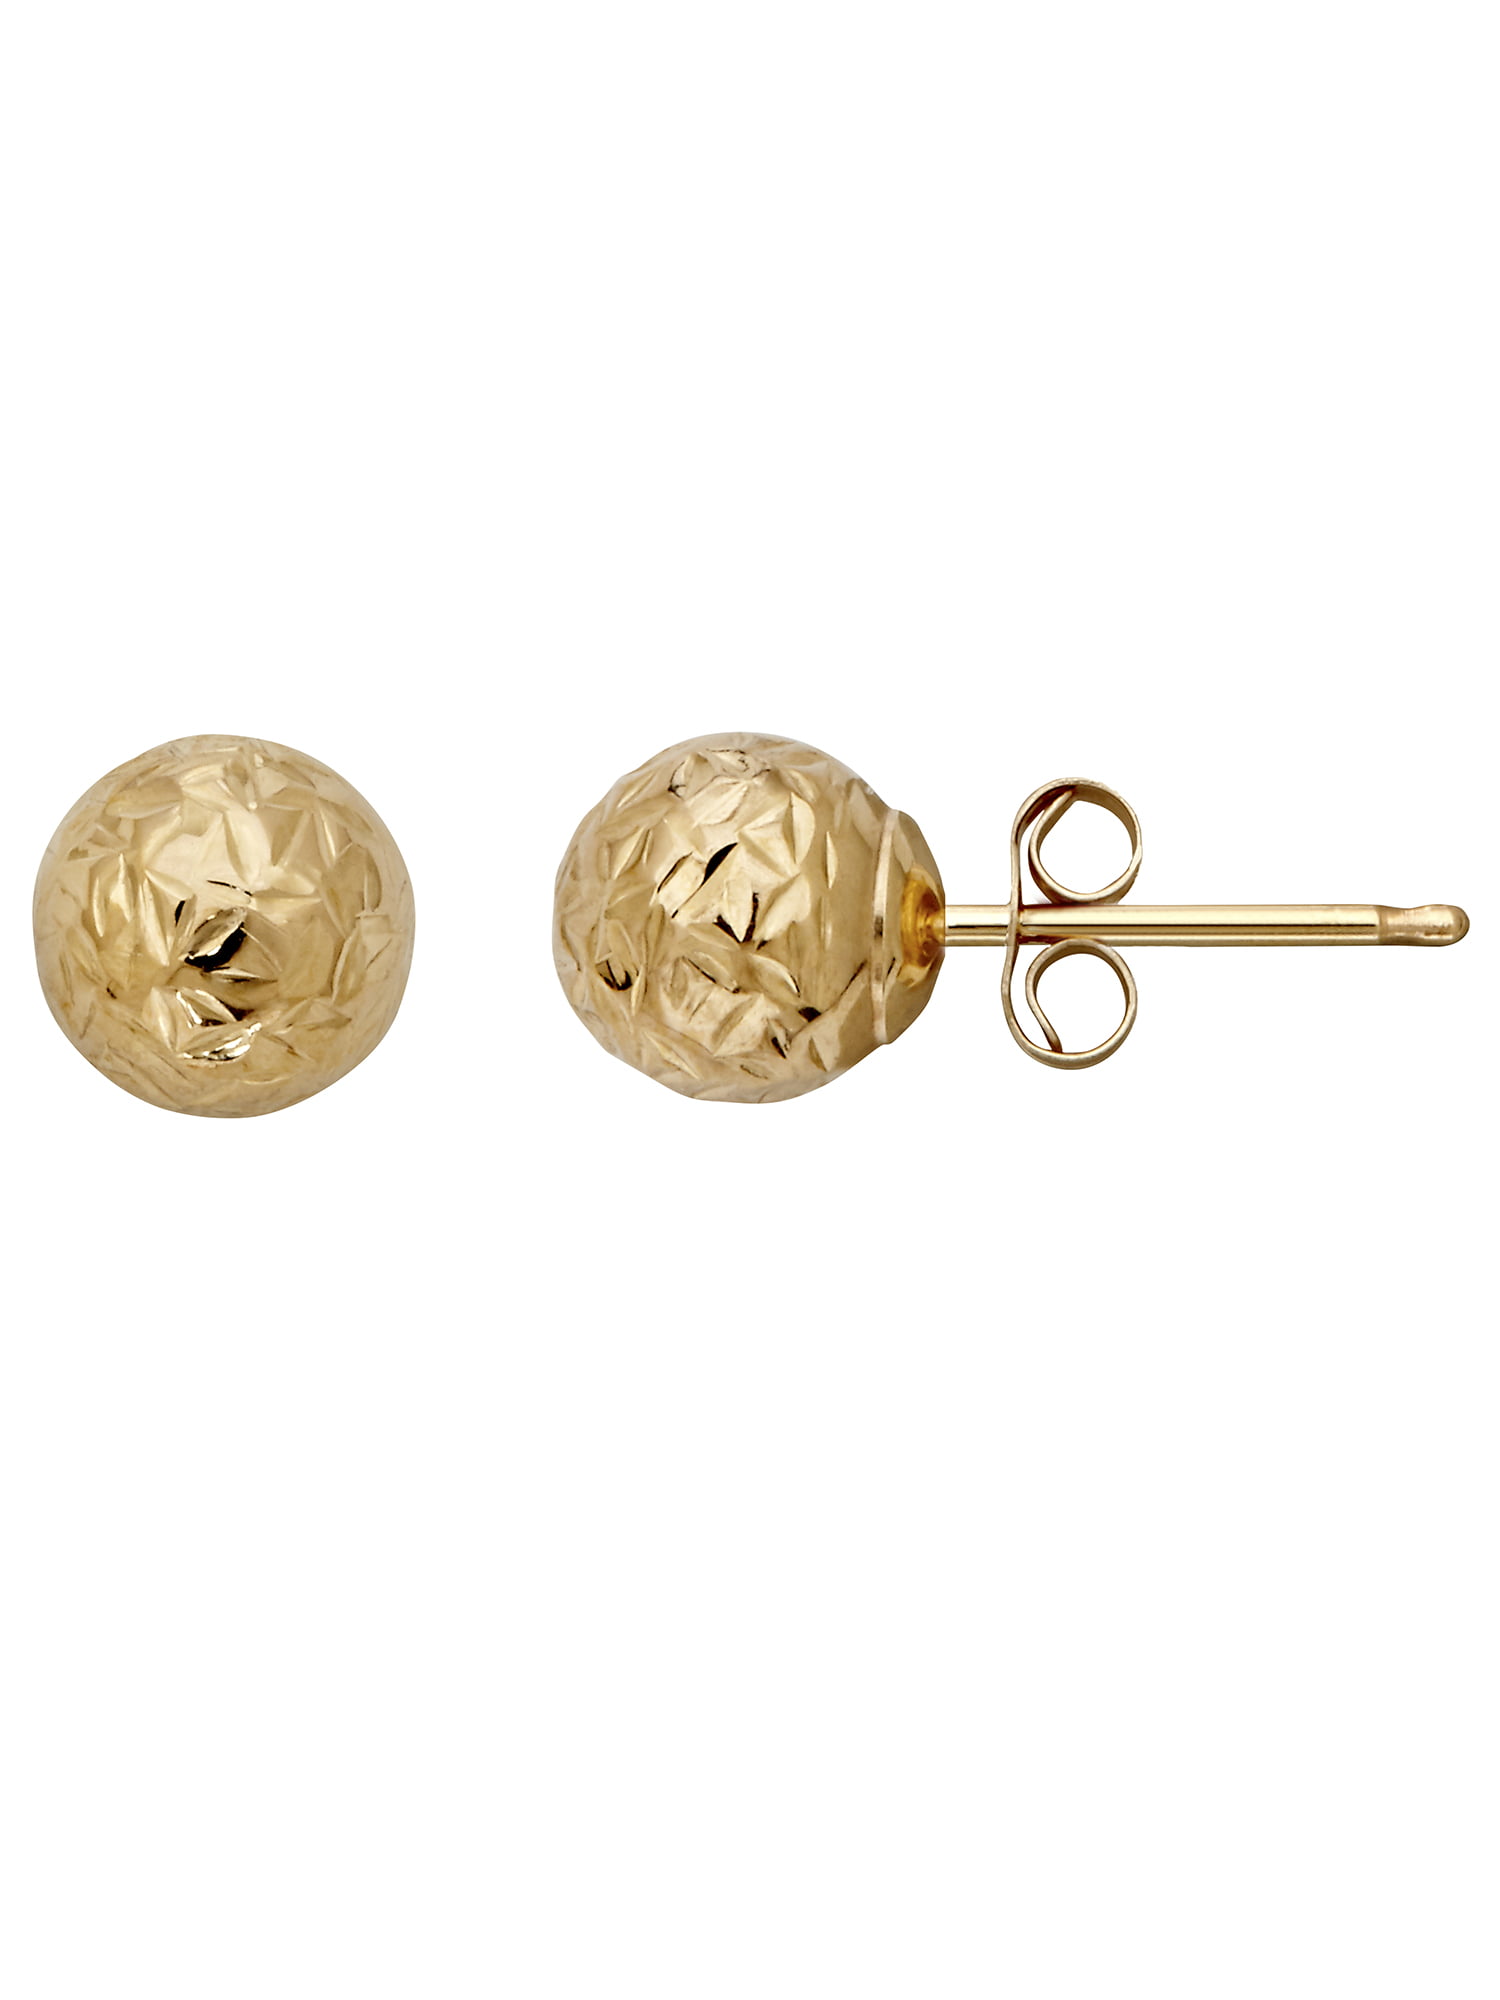 FB Jewels Solid 10K Yellow Gold Polished Ball Post Earrings